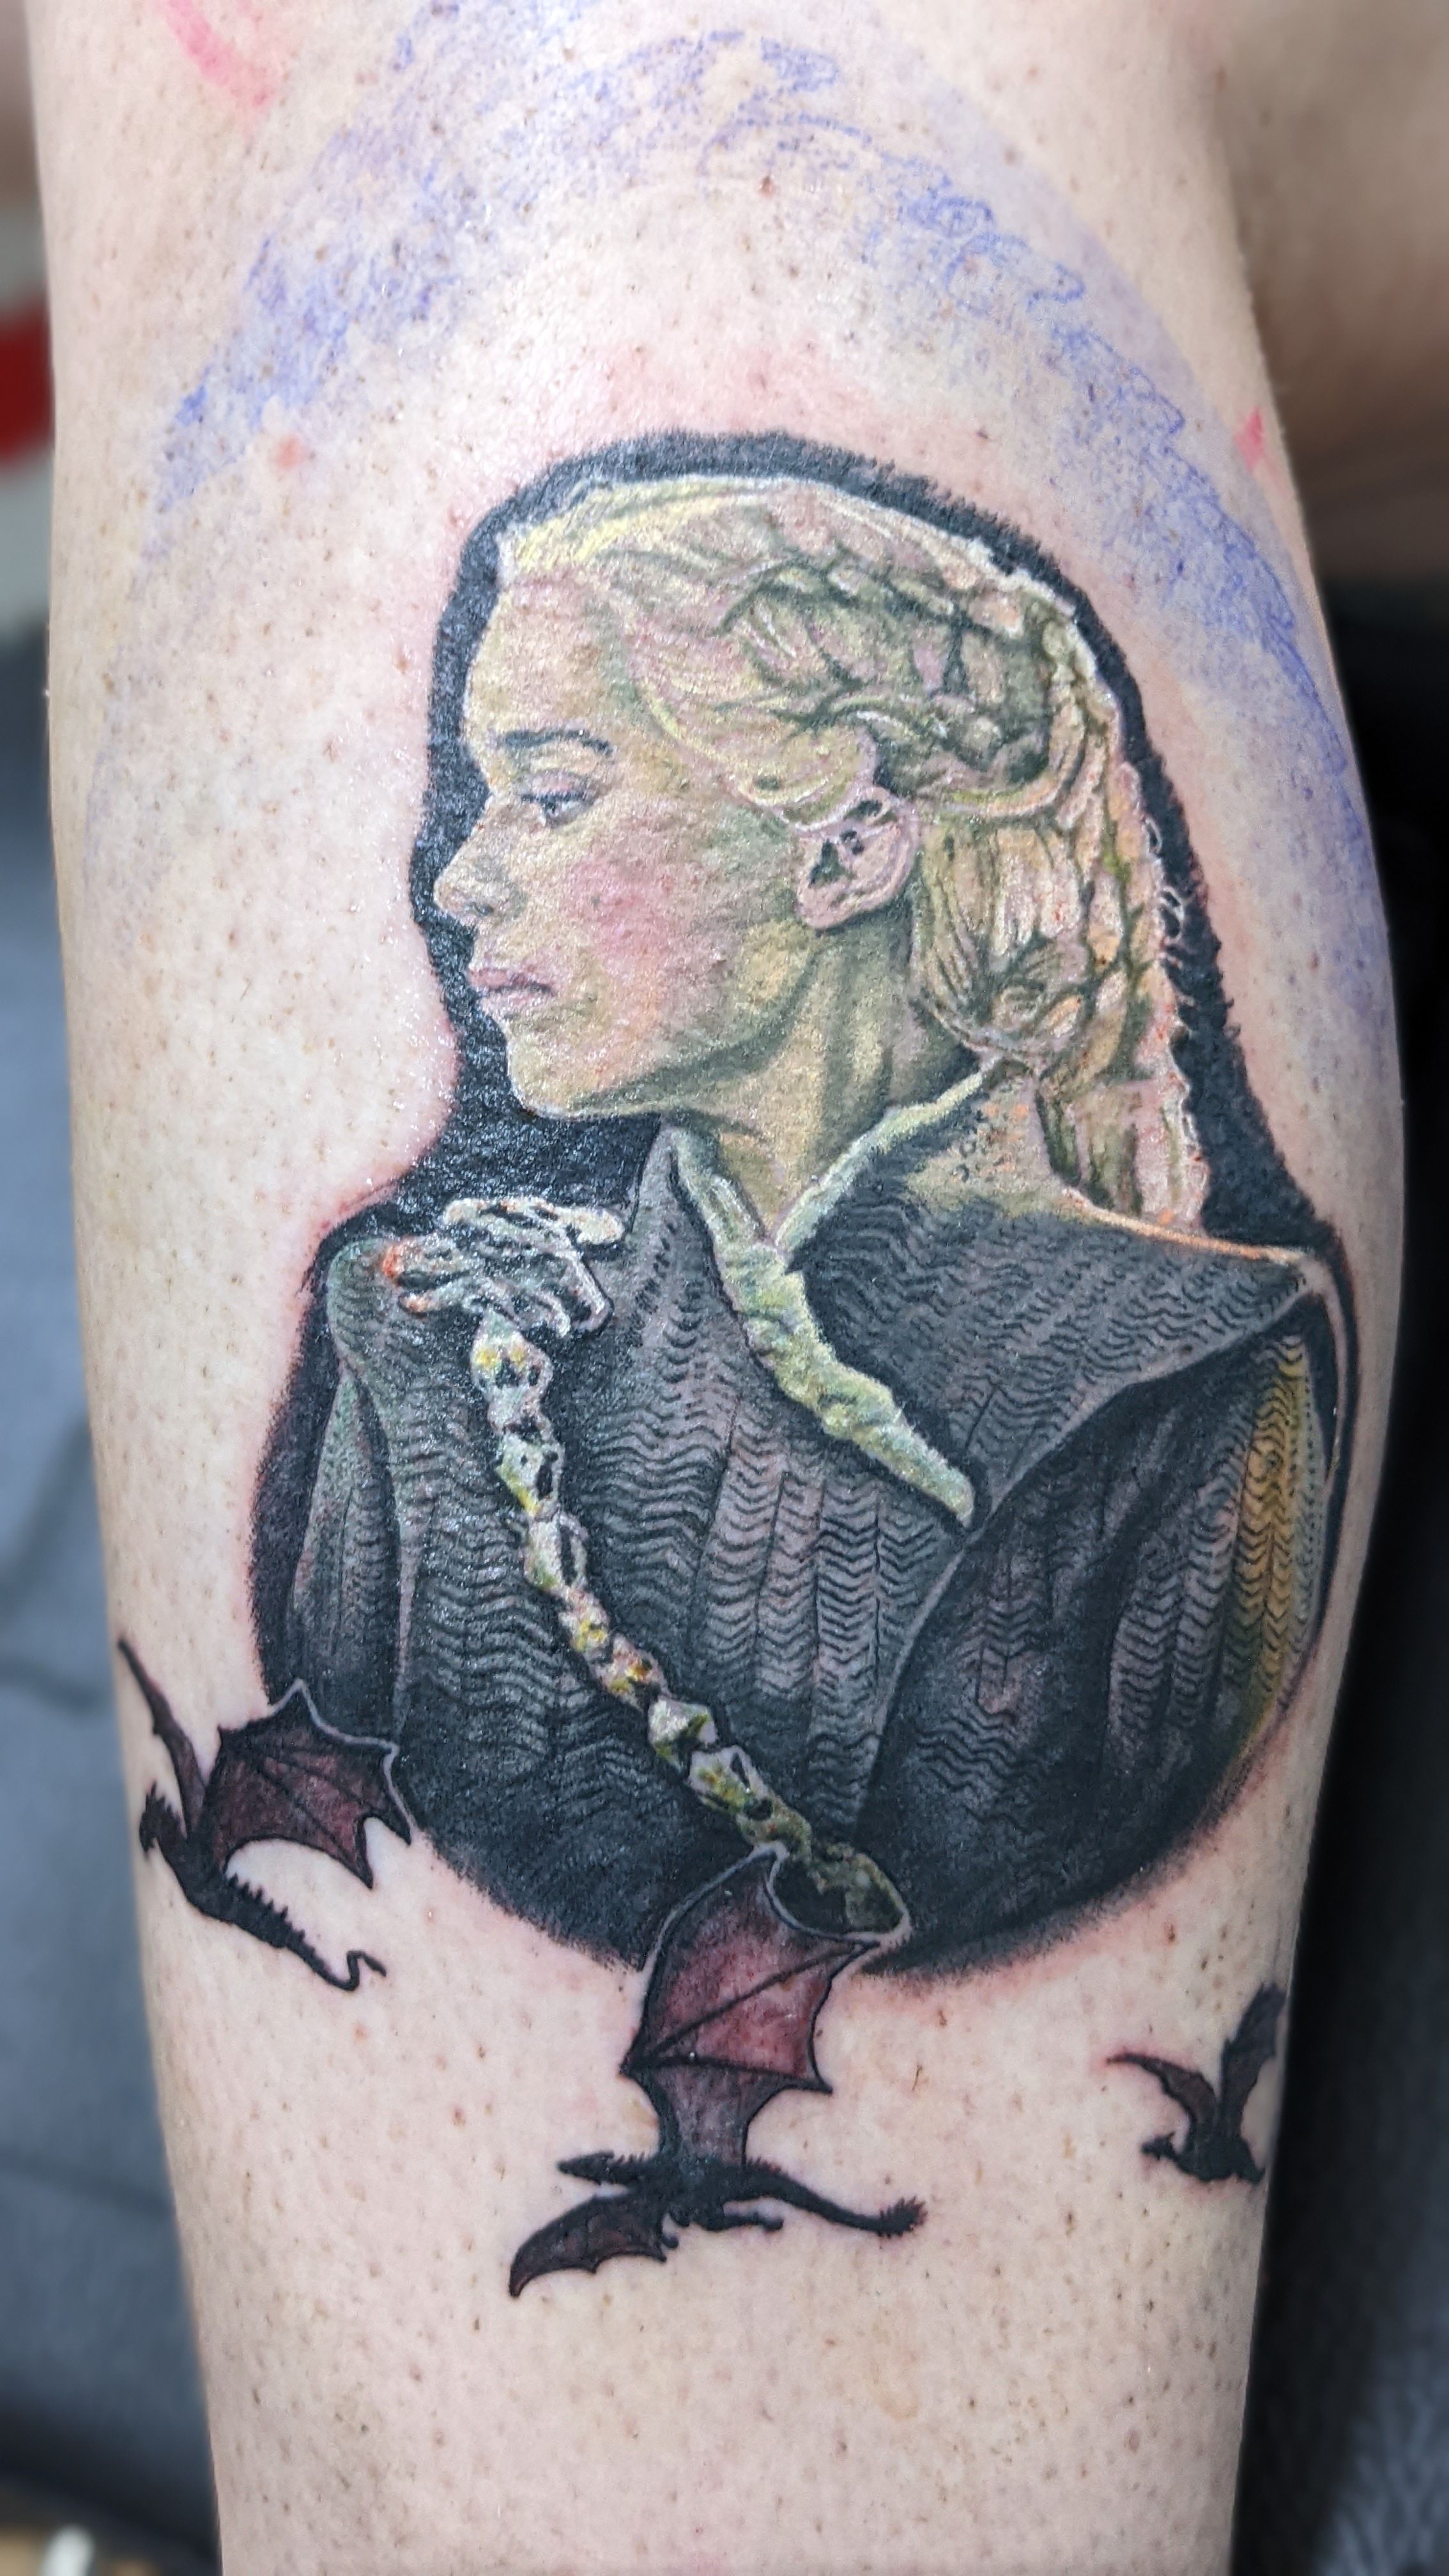 Game Of Thrones: 10 Stark Tattoos Only Devoted Fans Would Get